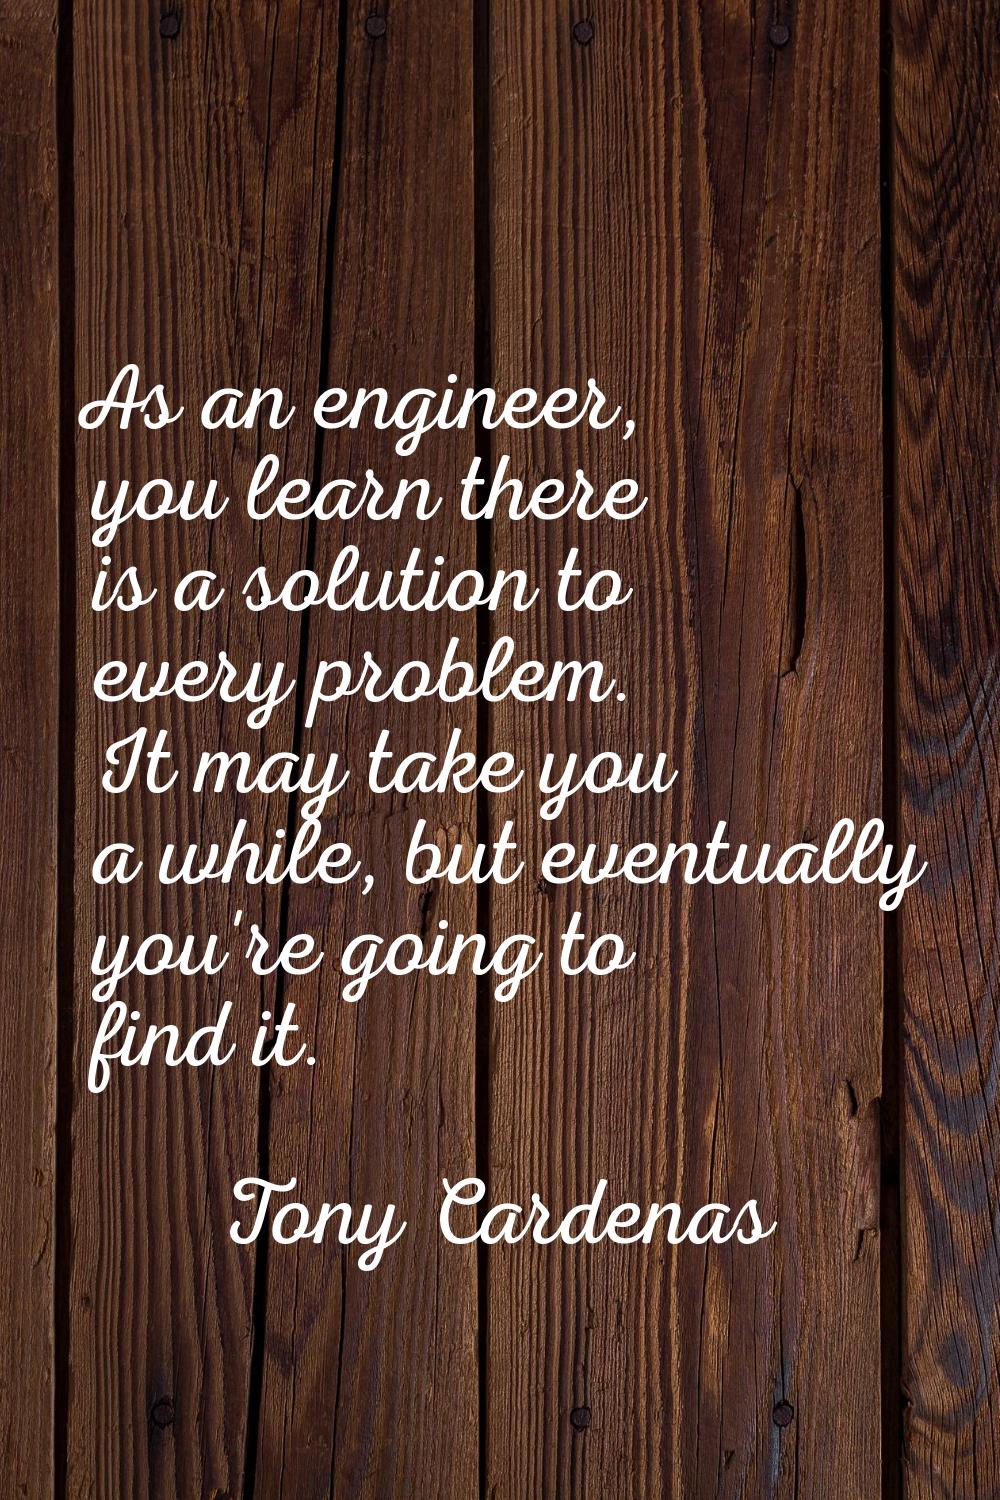 As an engineer, you learn there is a solution to every problem. It may take you a while, but eventu